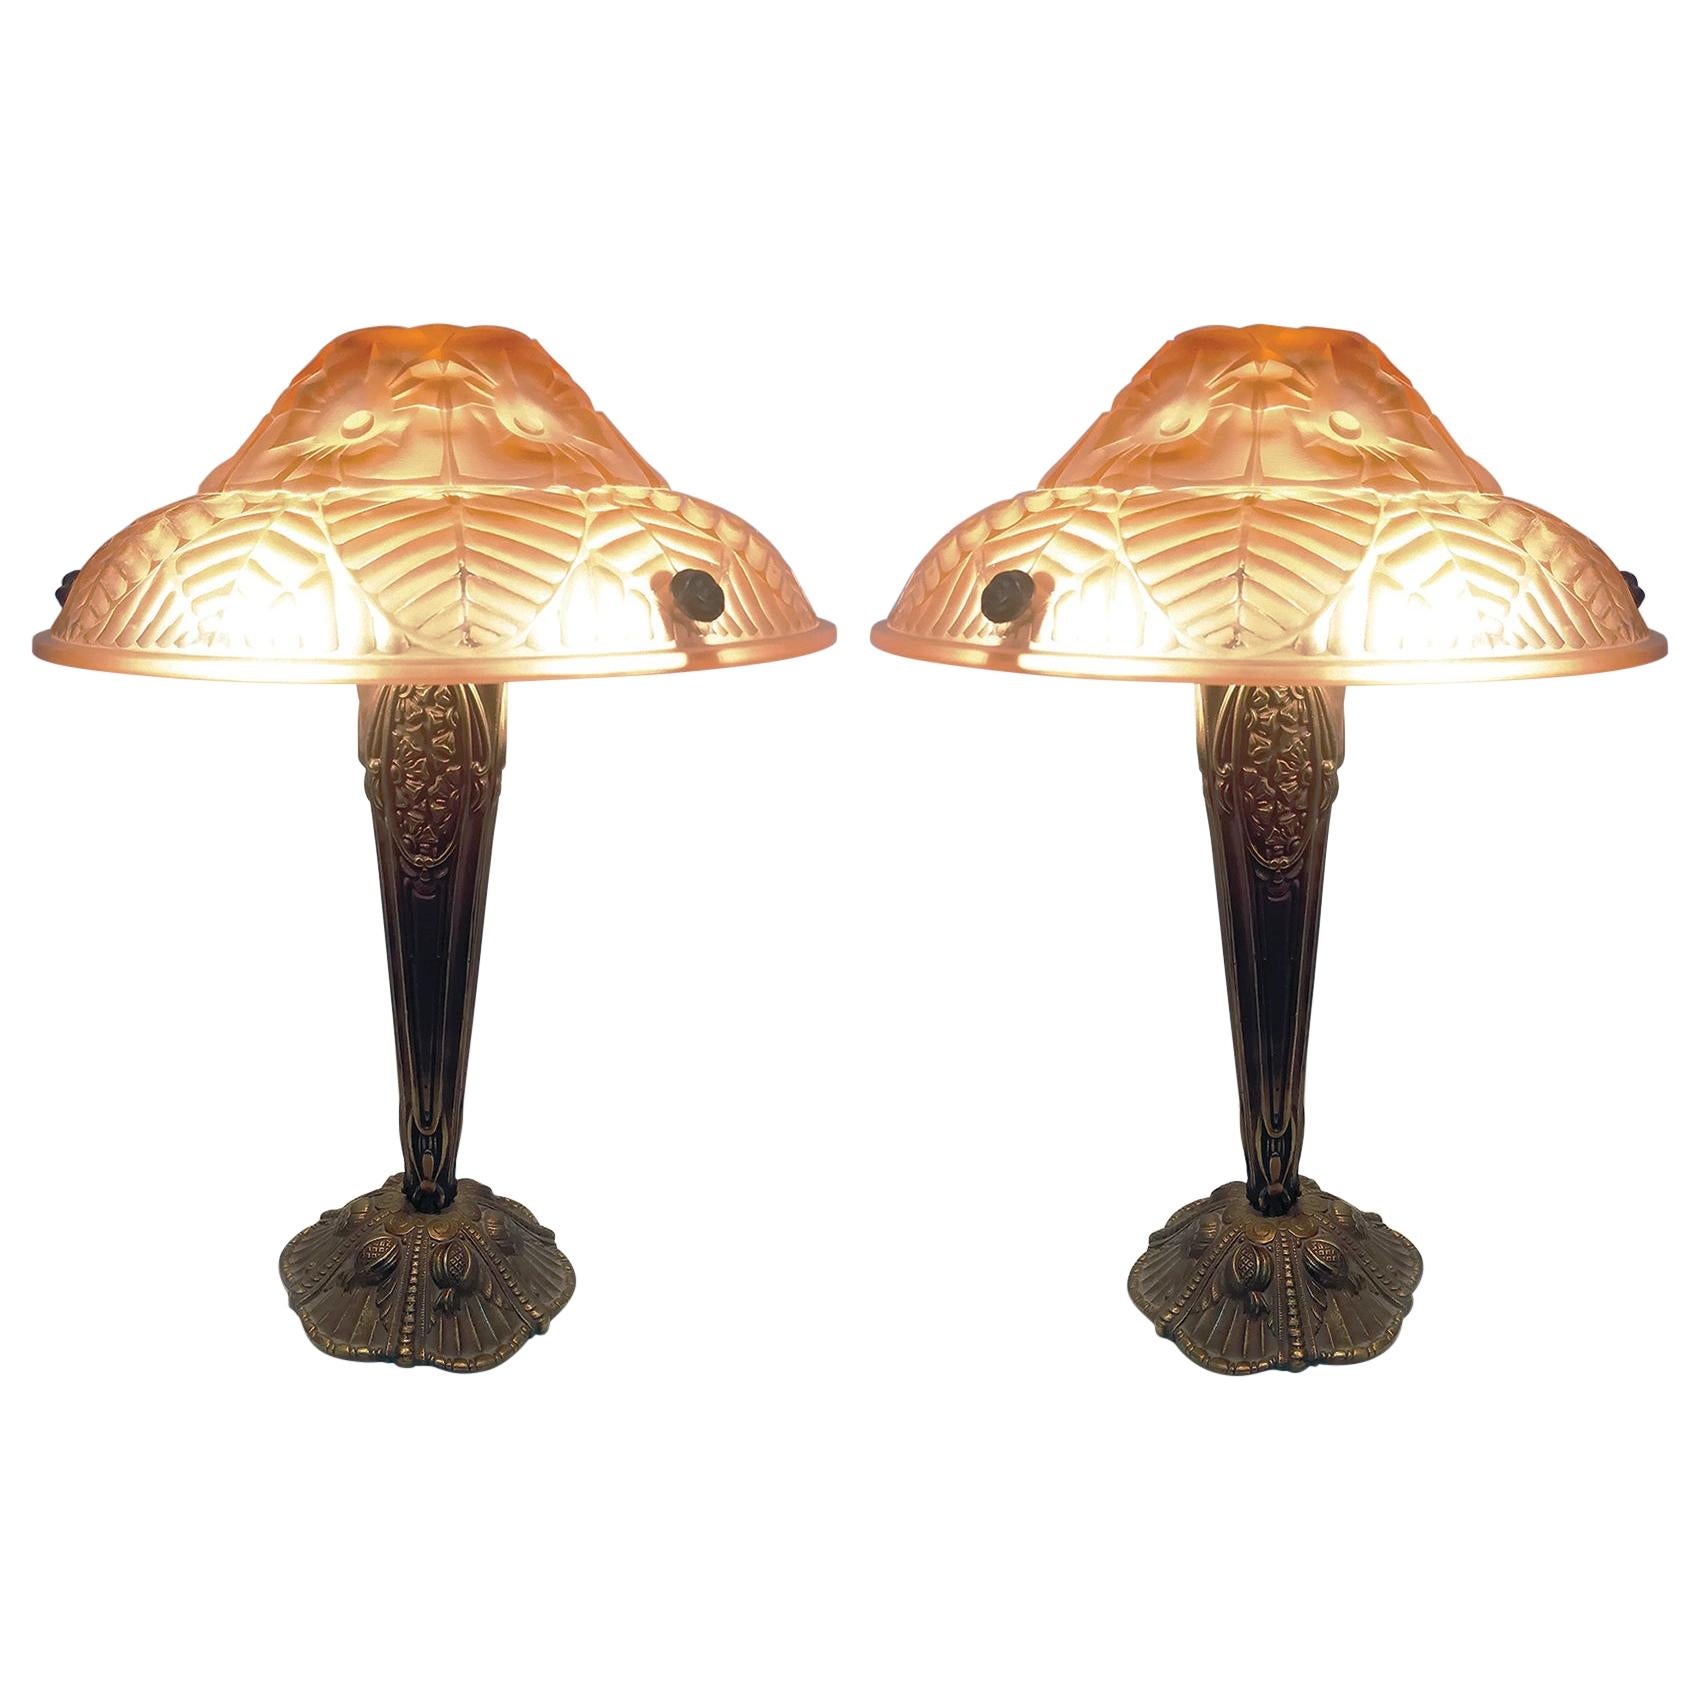 Beautiful Pair of French Art Deco Table Lamps Signed Ranc Freres, circa 1930